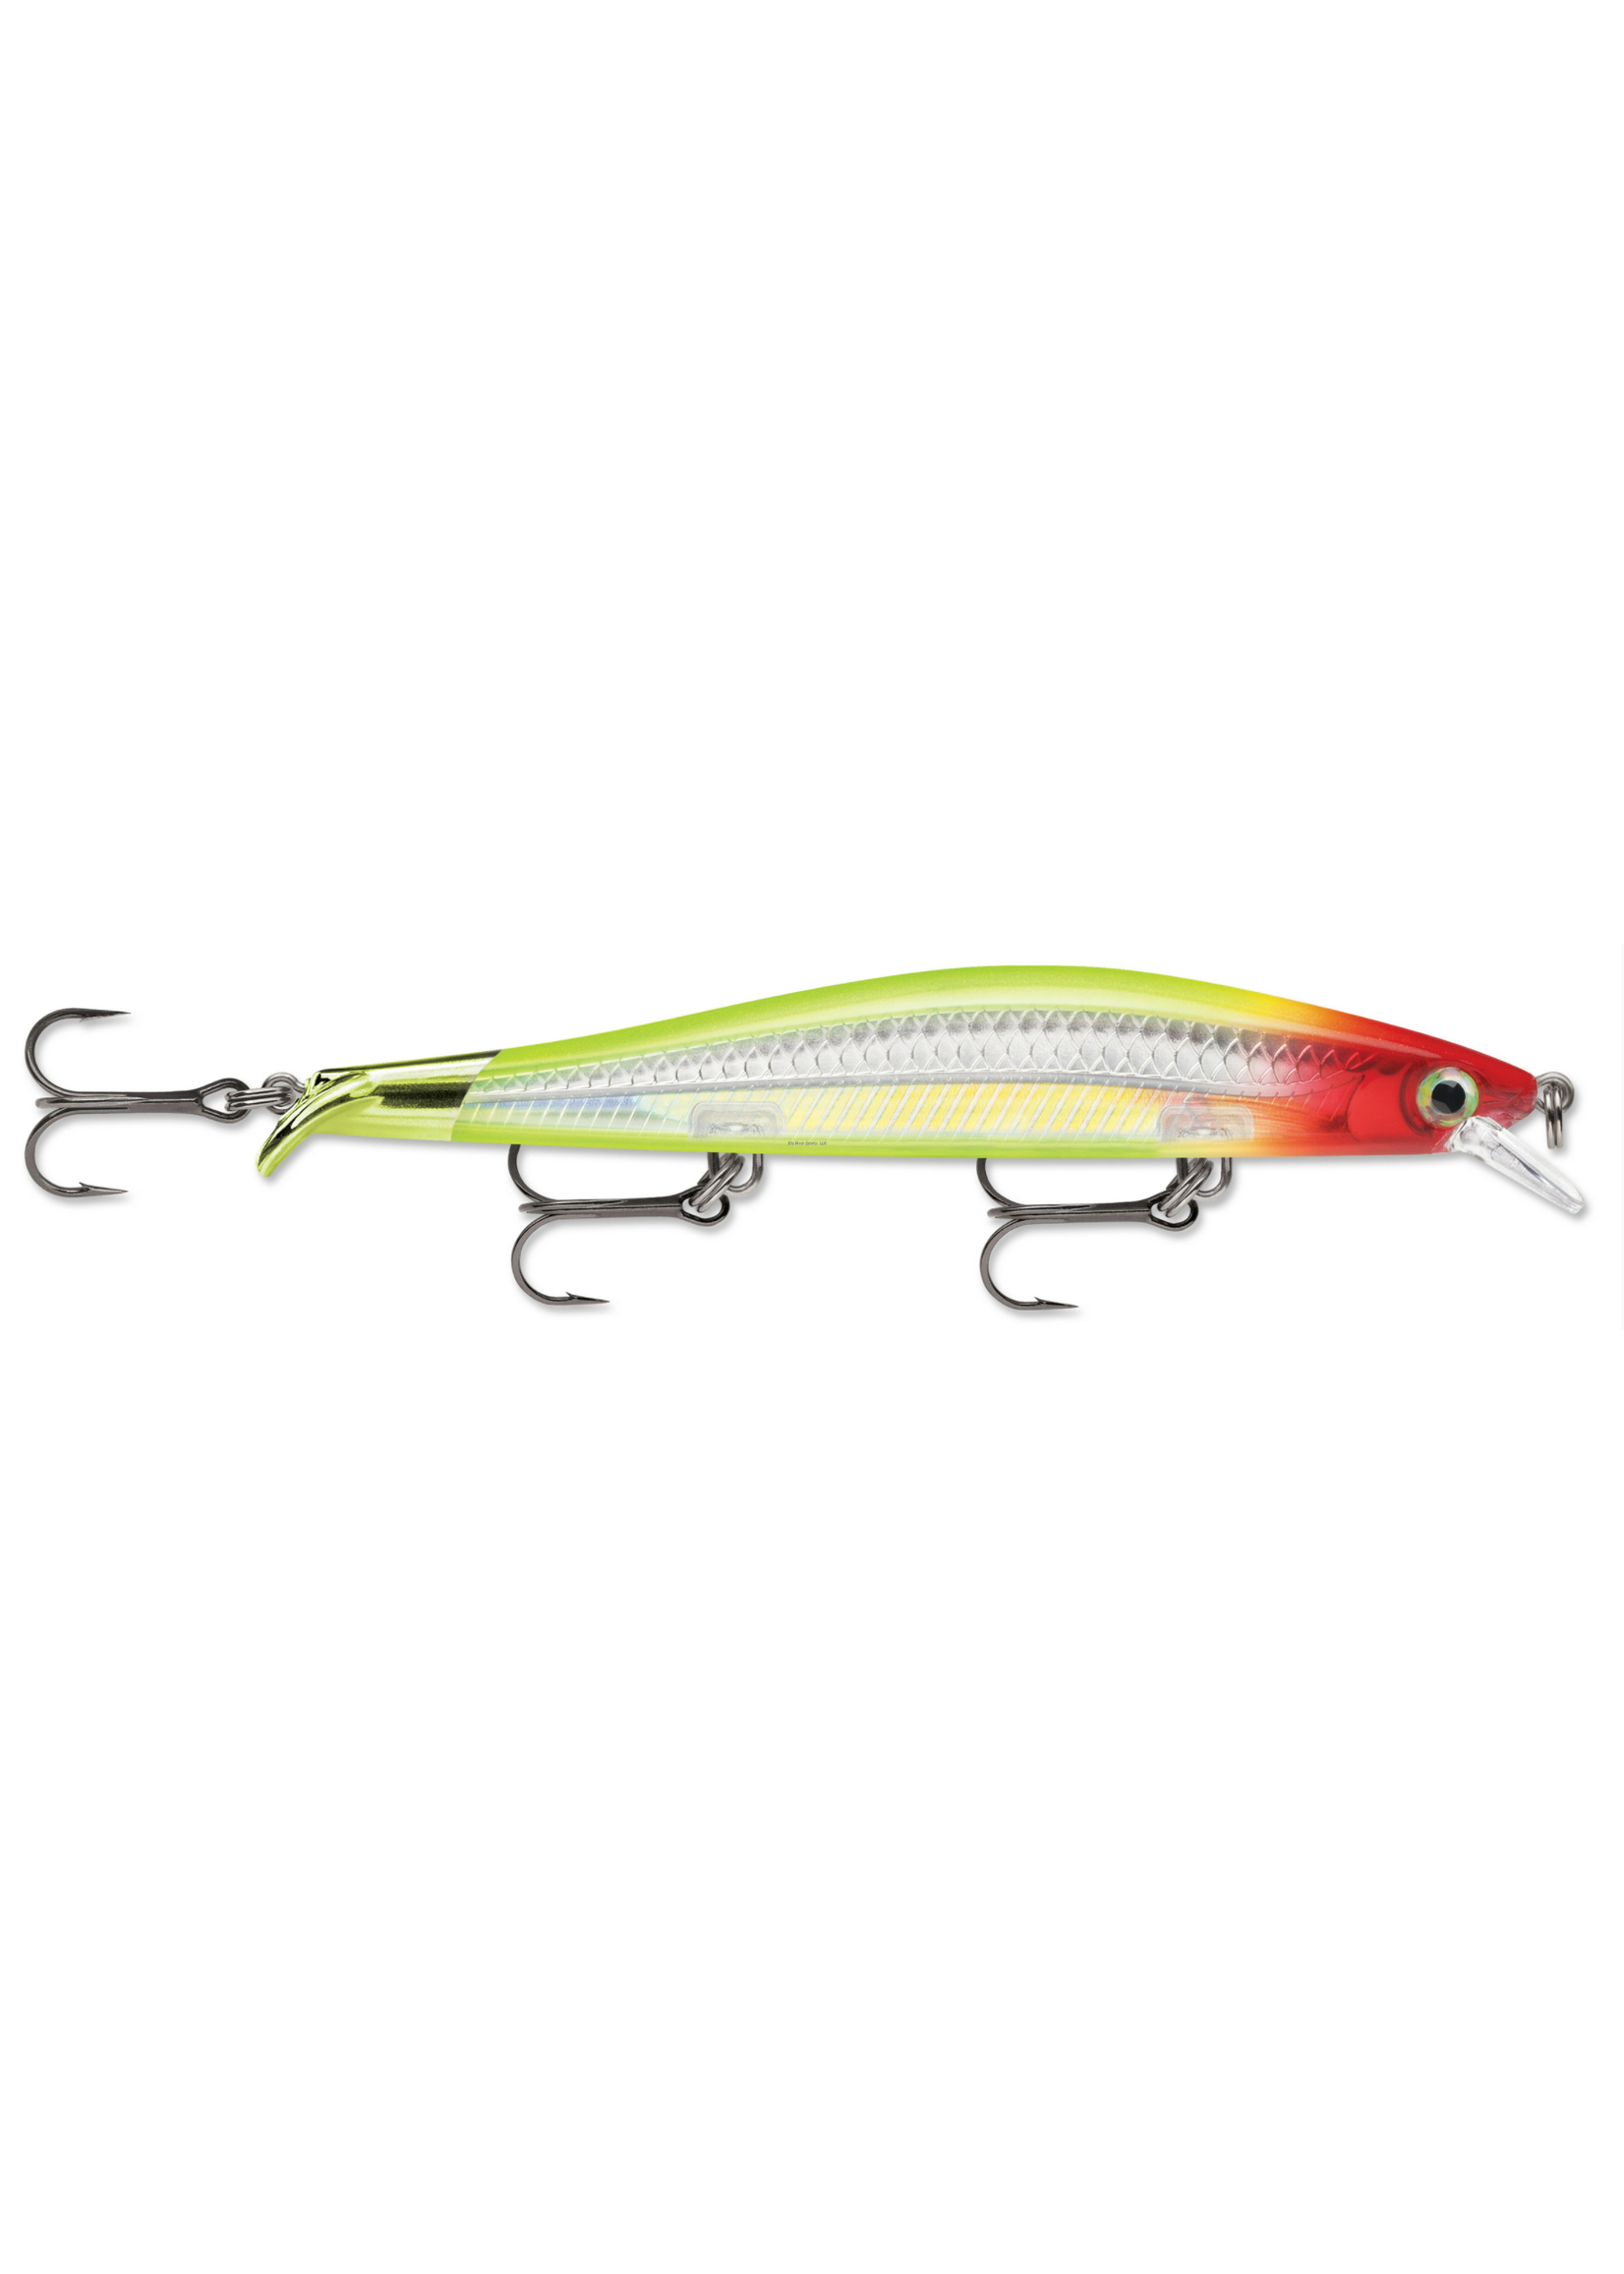 RipStop 12 Lure, 4-3/4, 1/2 Oz - Clown - Brothers Outdoors LLC